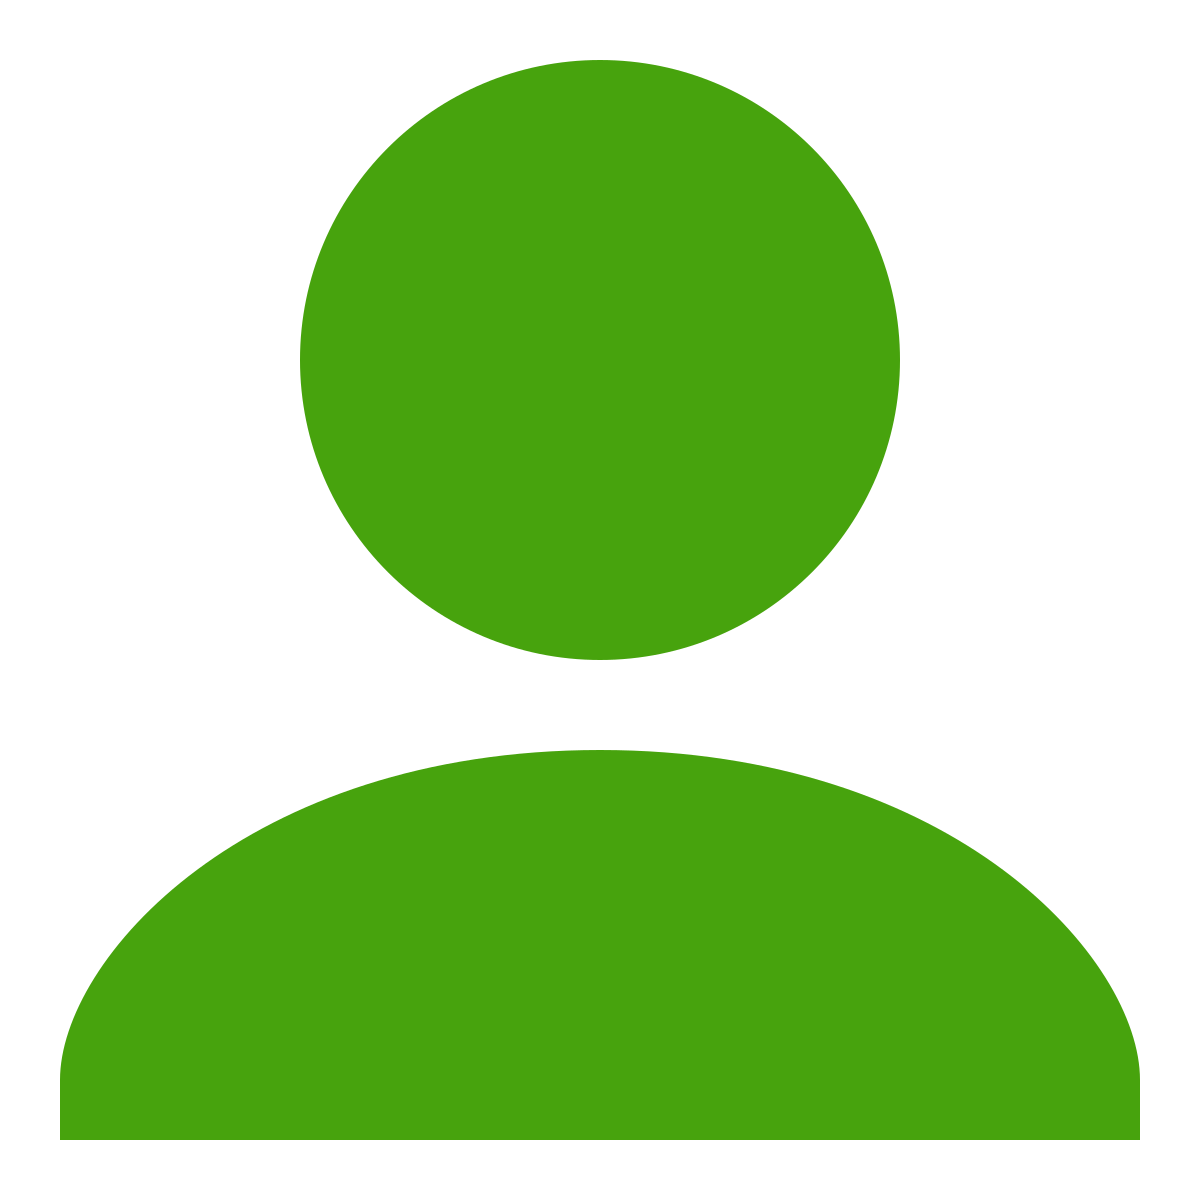 File:Avatar icon green.svg - Wikimedia Commons